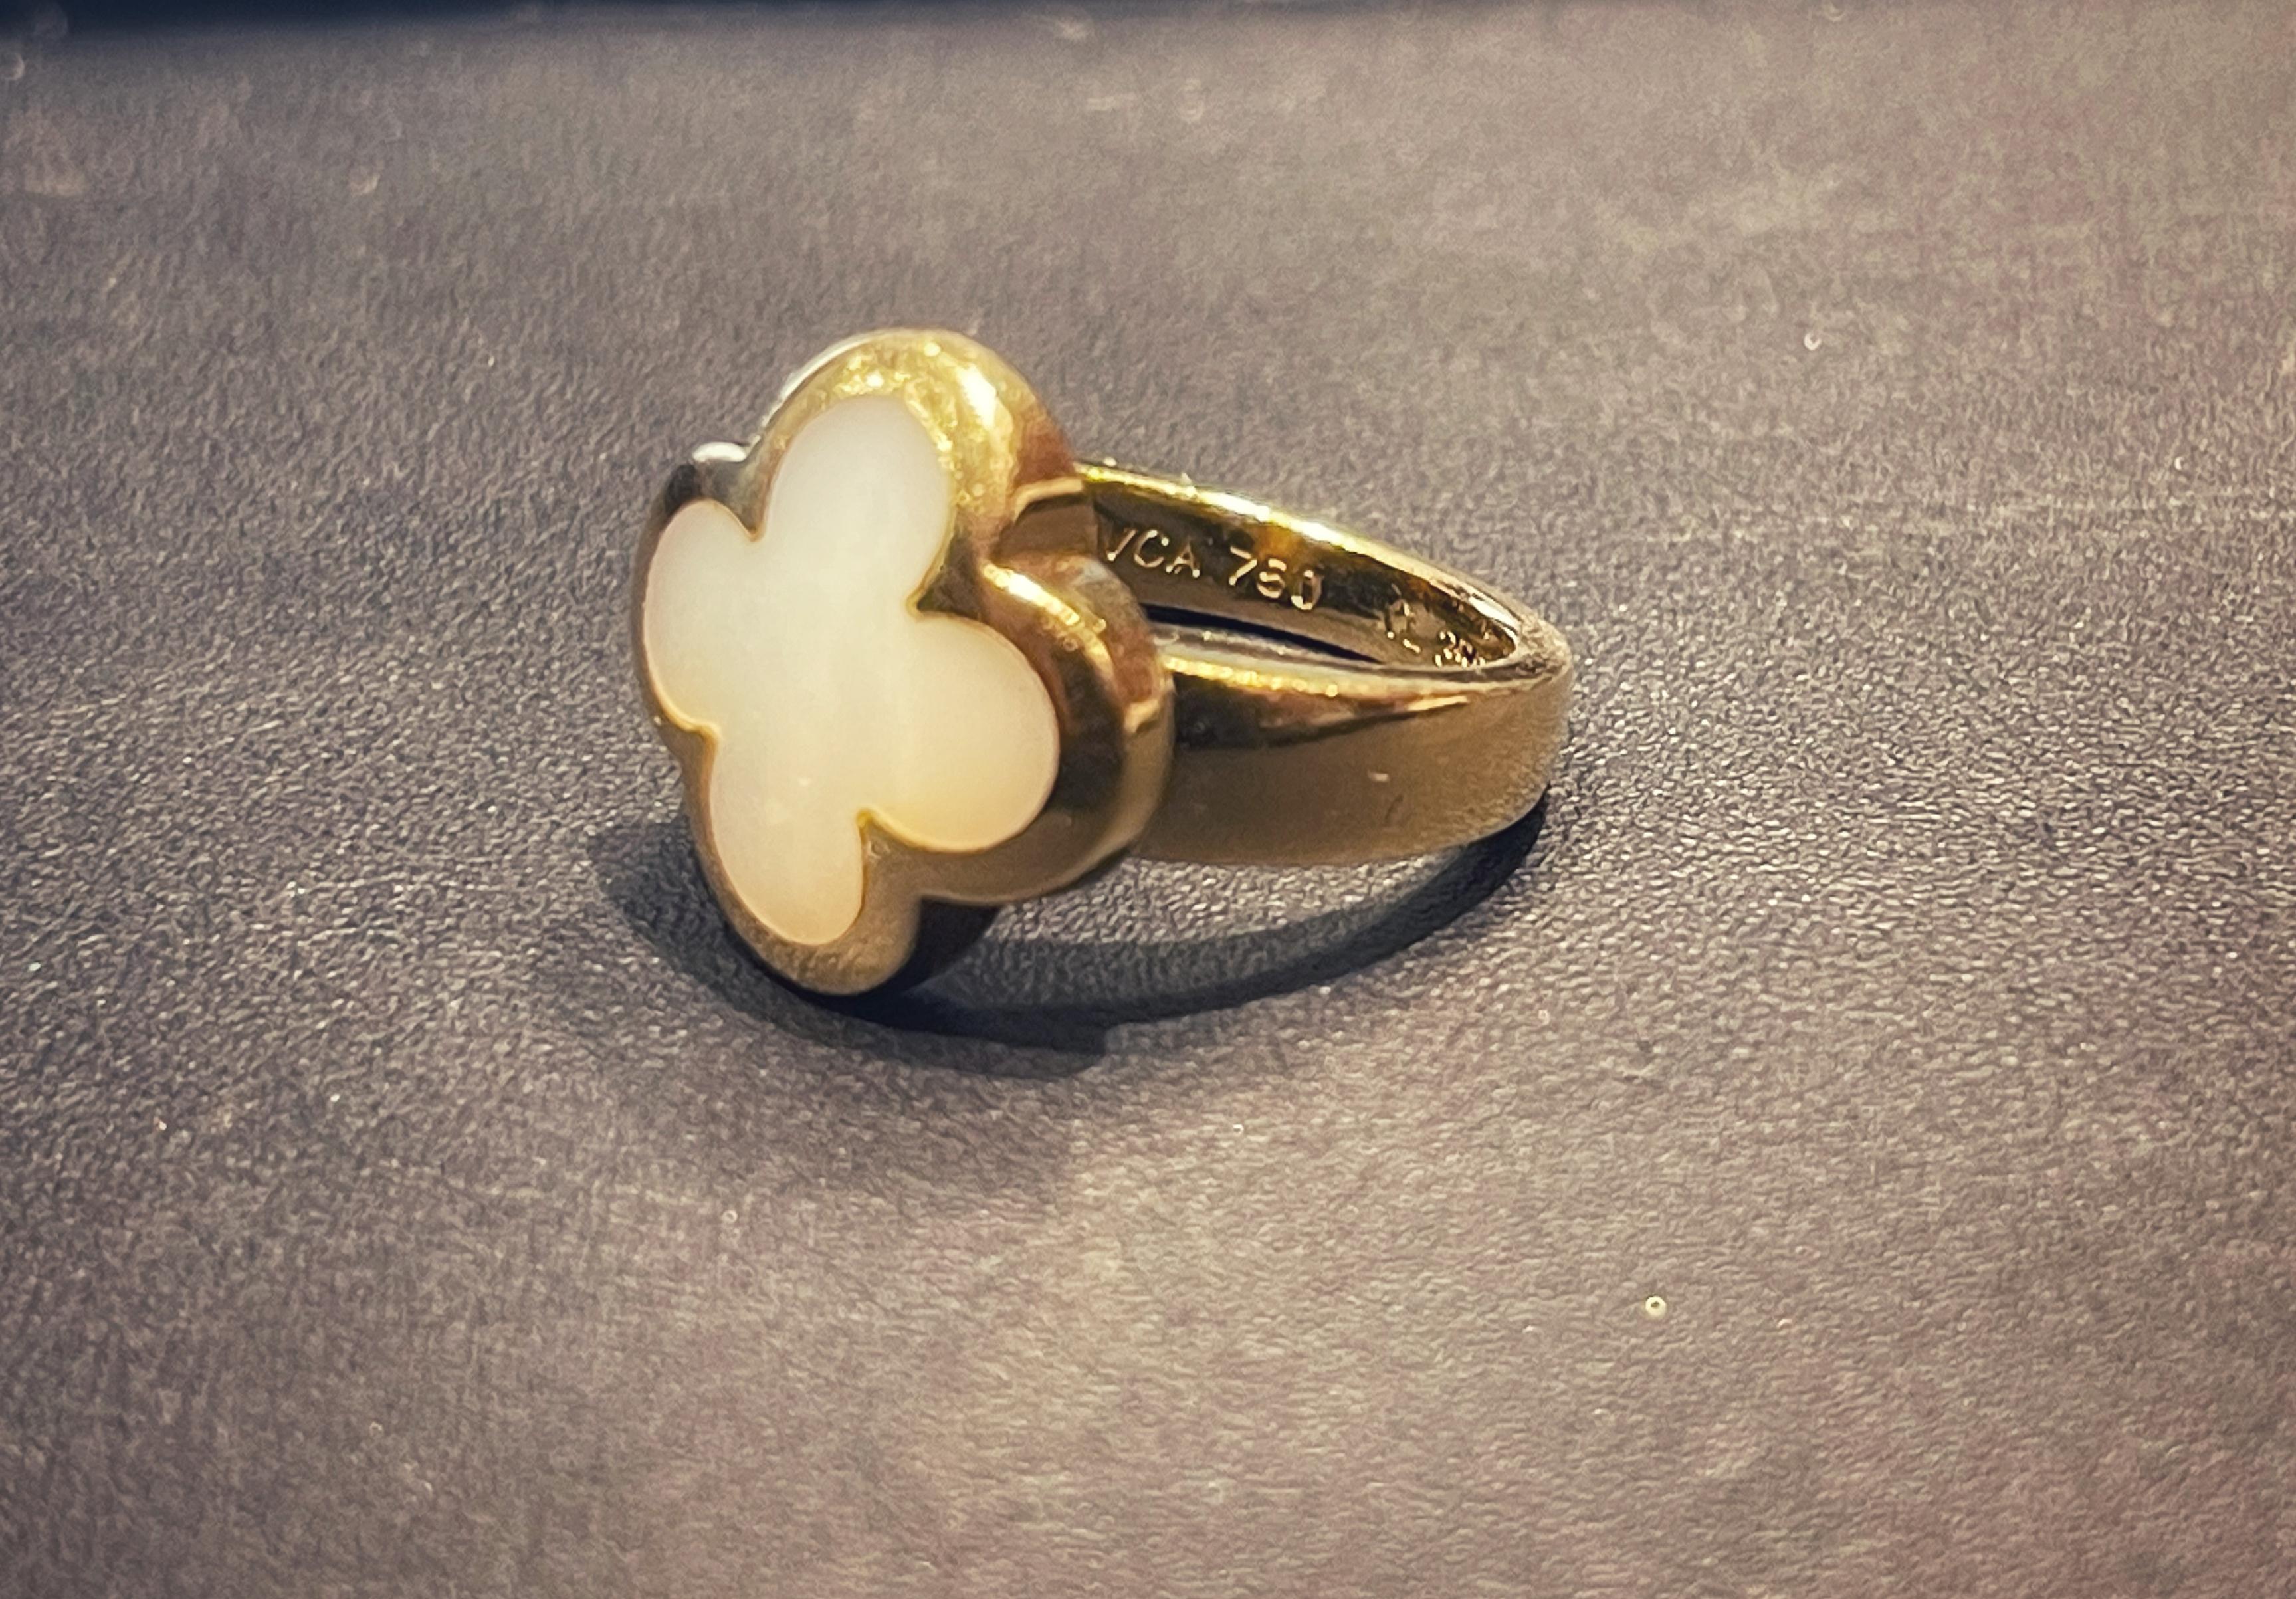 A stunning 18K yellow Alhambra ring by Van Cleef & Arples. The central flower is made of white mother of pearl.

The Alhambra collection is a genuine symbole of Van Cleef & Arples, created in 1968. 

EU size: 50
US size: 5.5
Total weight: 10.8